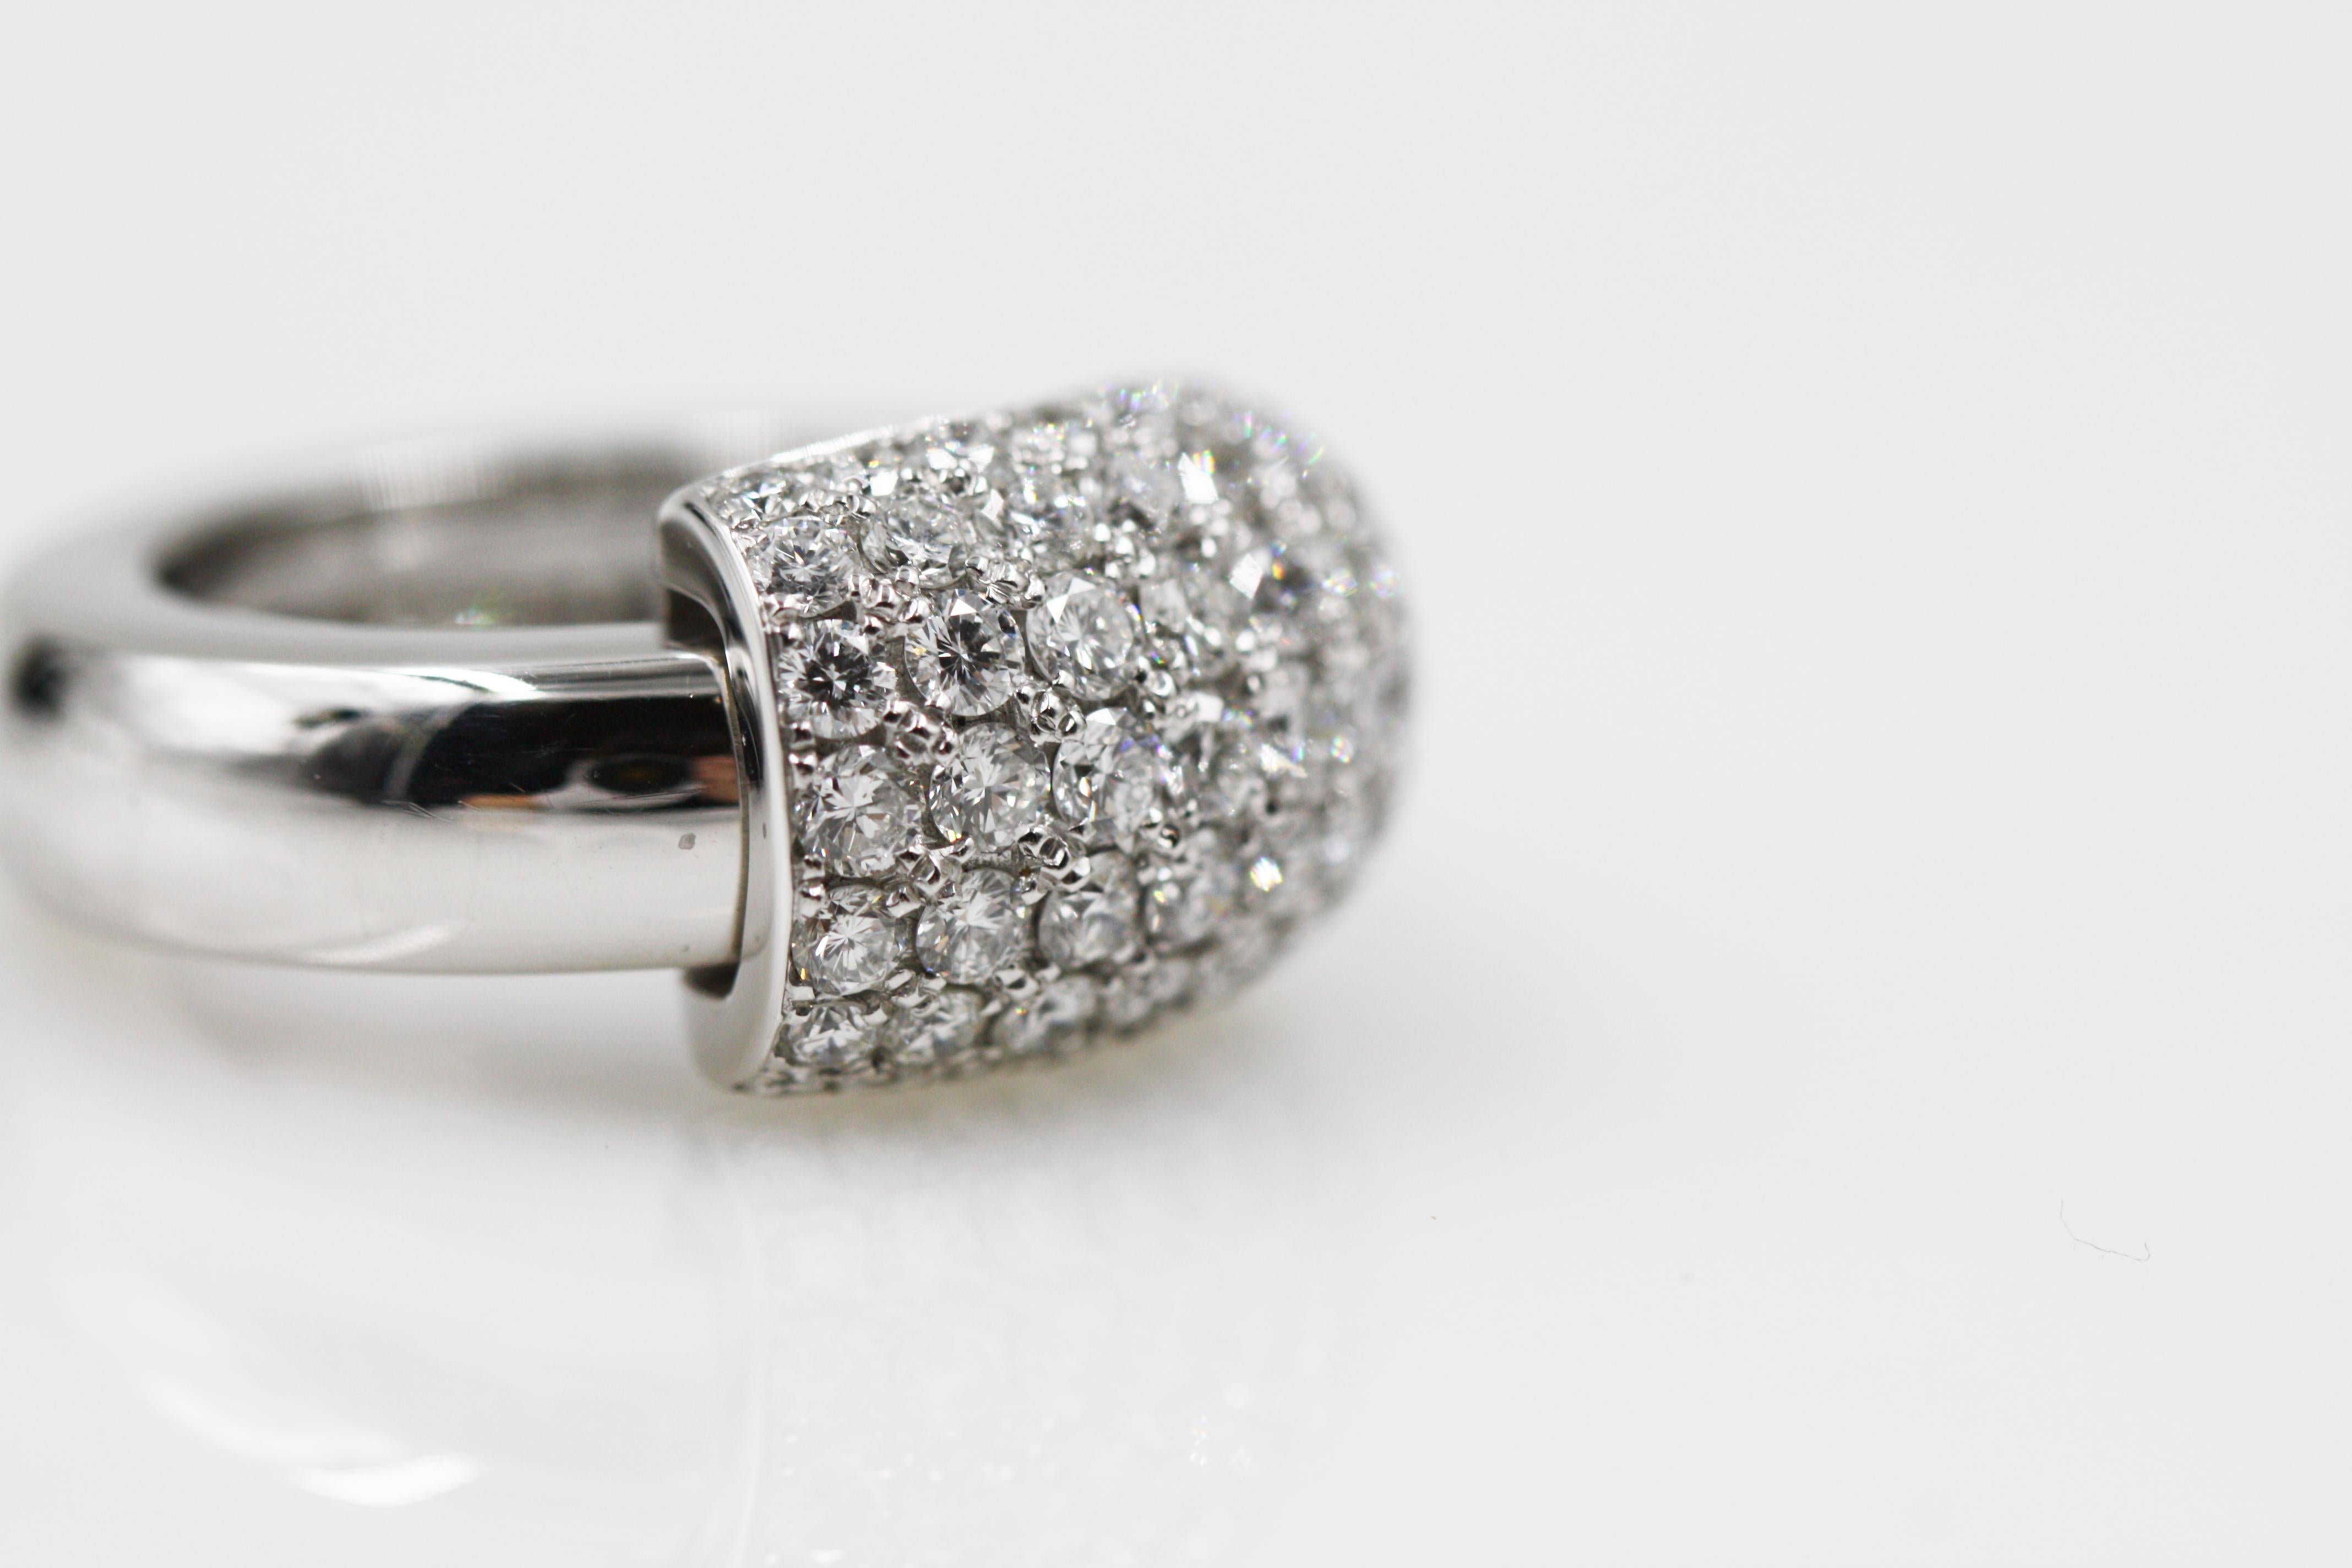 Piaget 18 Karat White Gold Diamond Ring In Excellent Condition For Sale In New York, NY